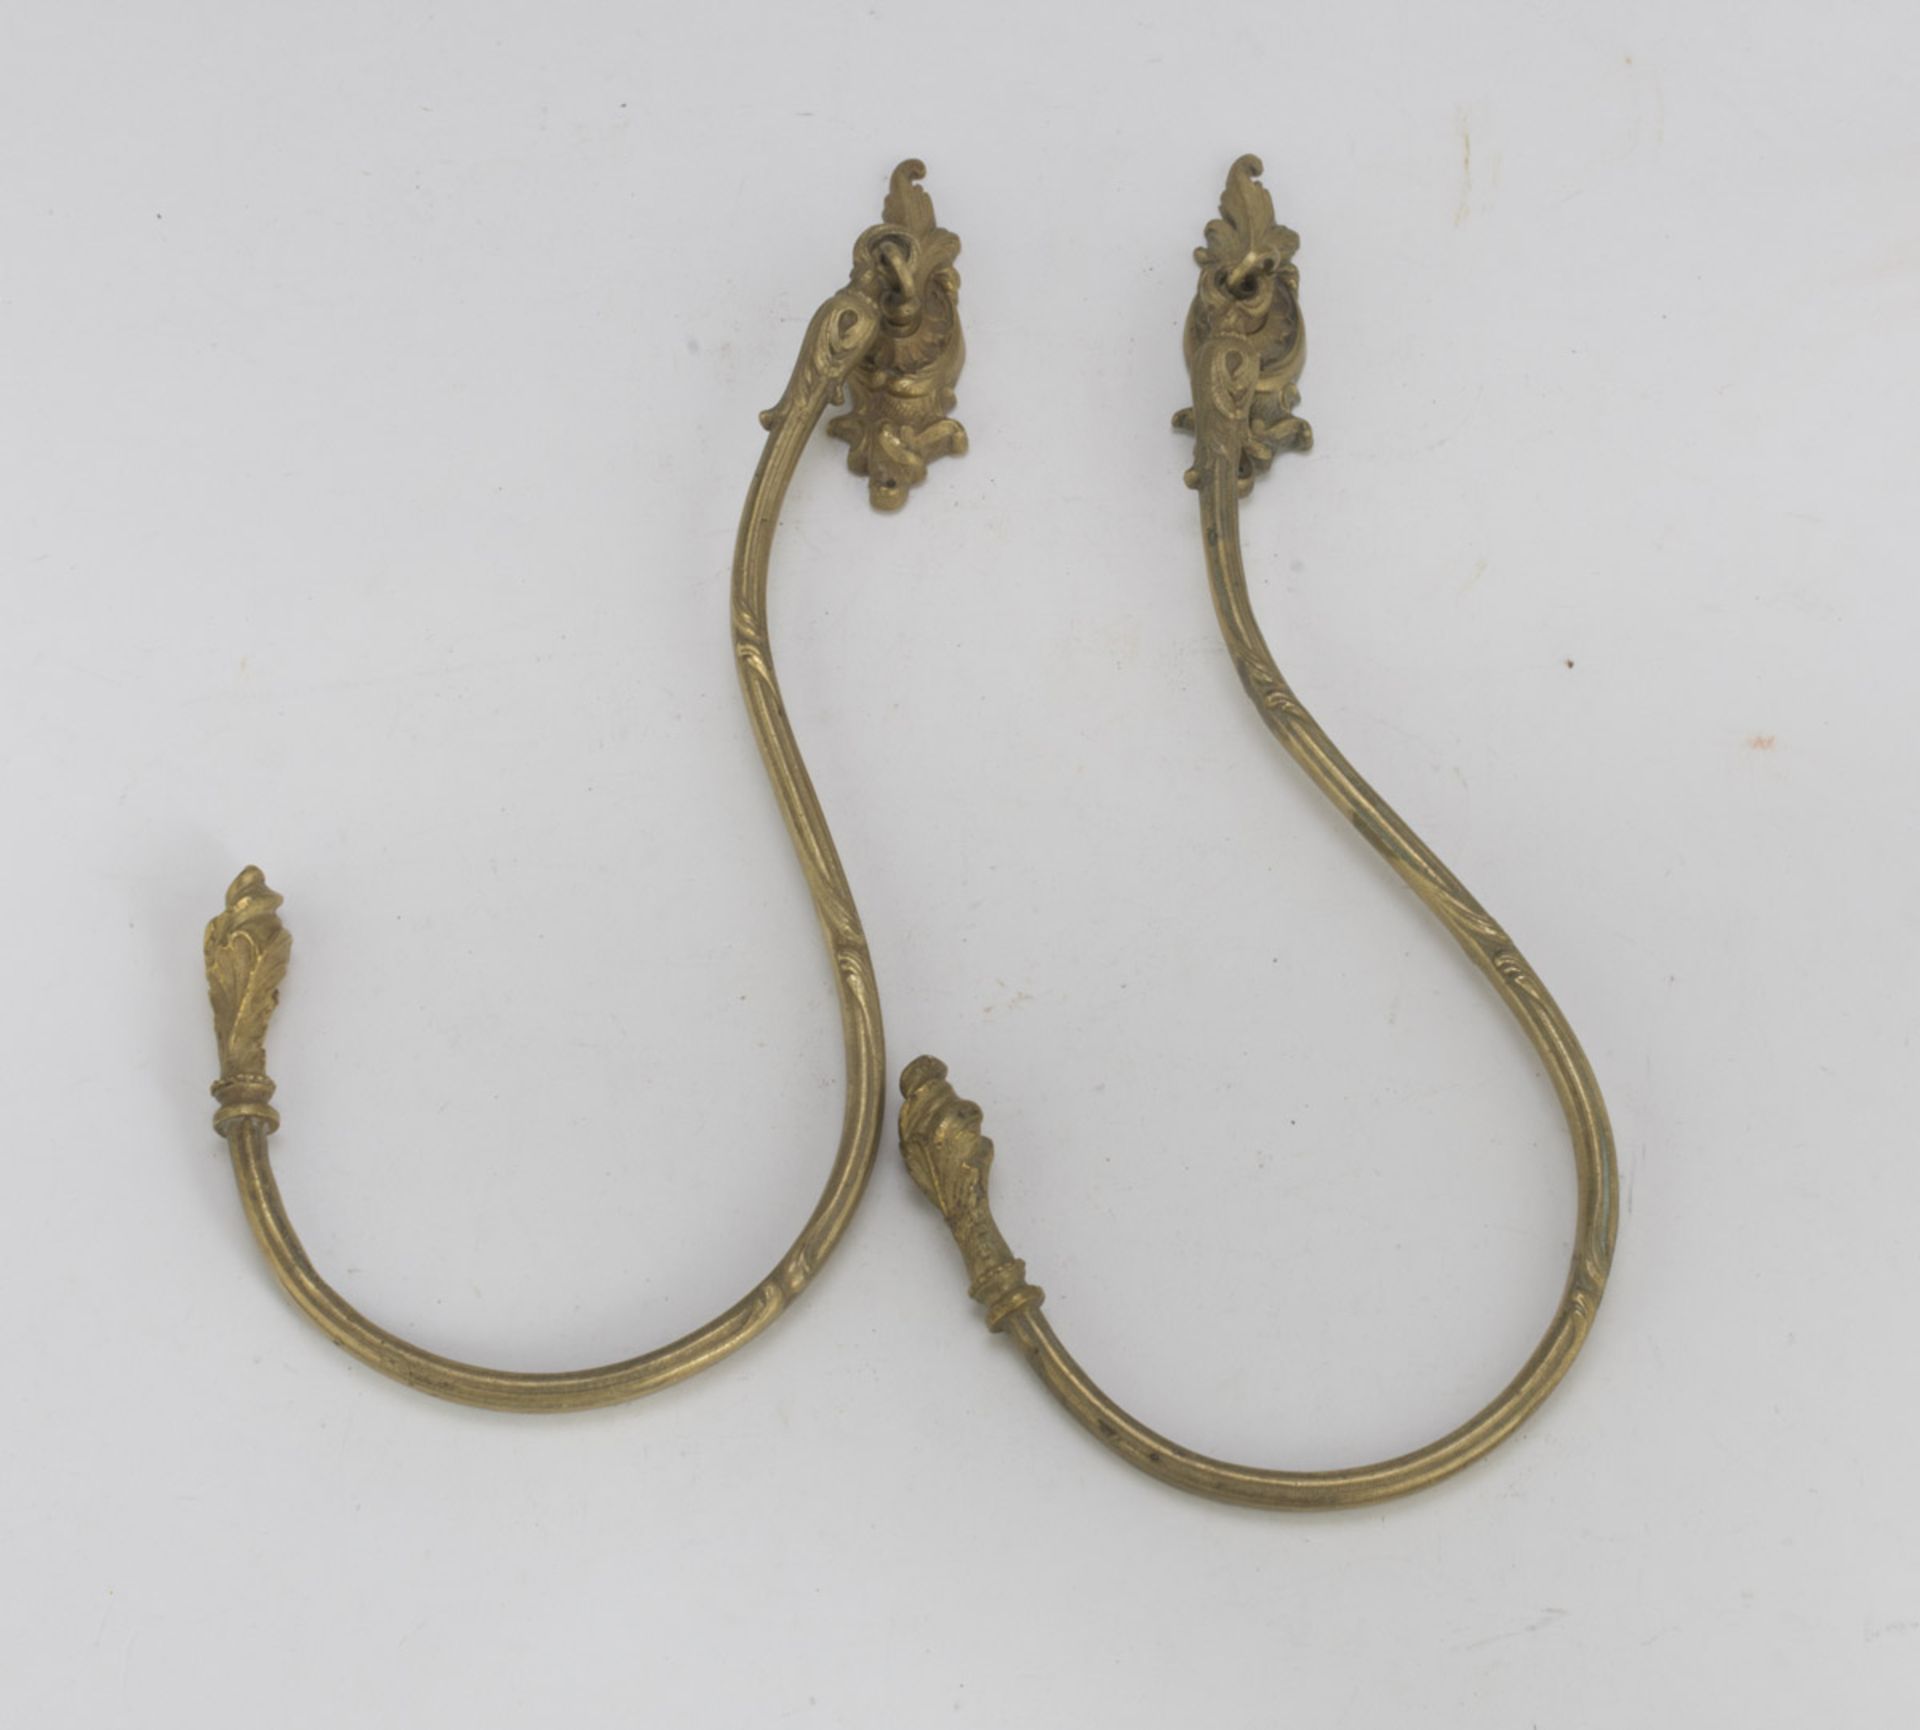 PAIR OF CURTAIN ROD IN ORMOLU, END 18TH CENTURY chiseled to leaves and climbers. Measures cm. 37 x 2